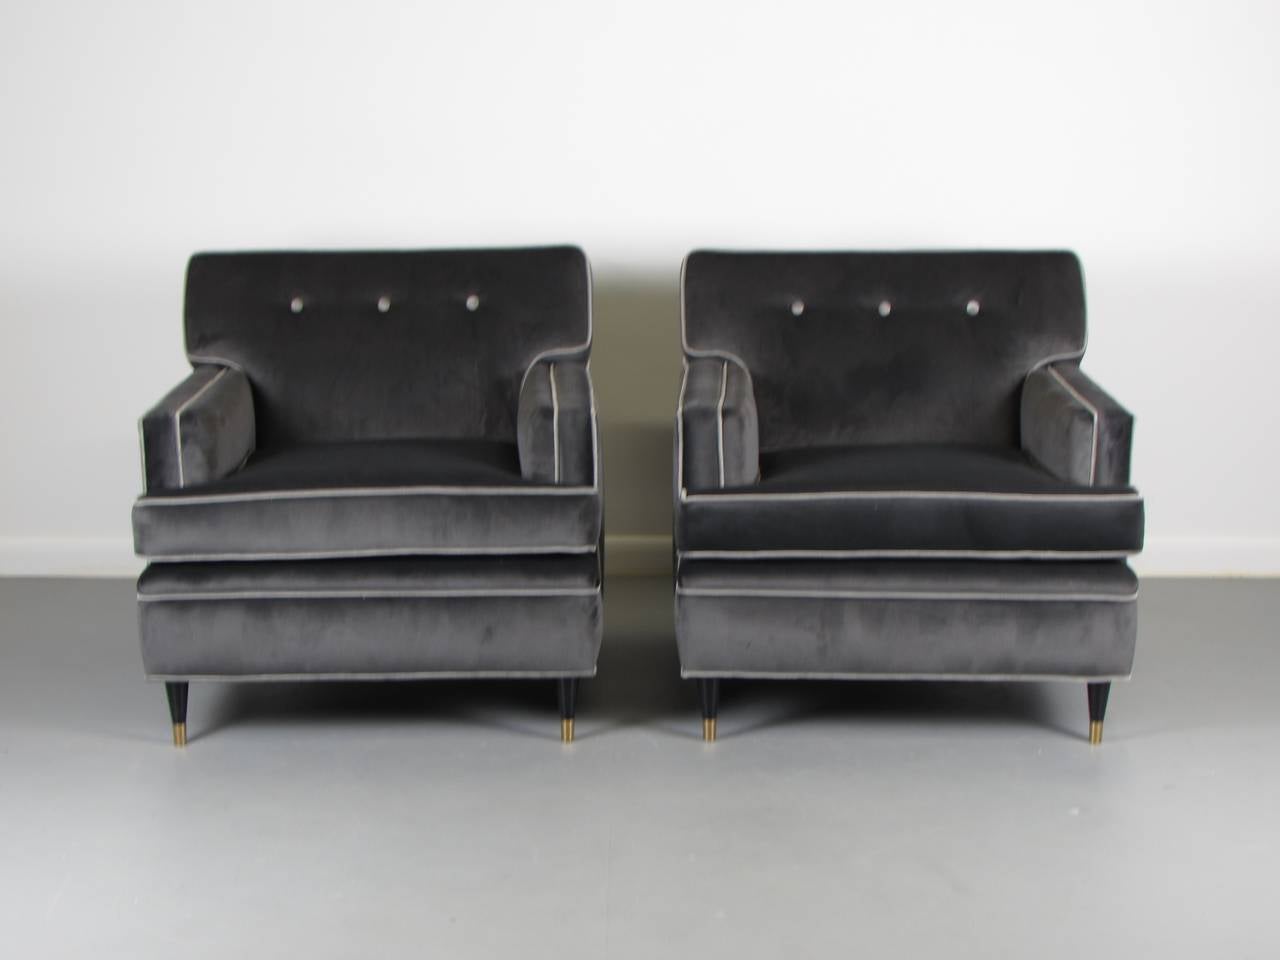 American Pair of Charcoal Velvet Tuxedo Lounge Chairs After Harvey Probber, 1960s